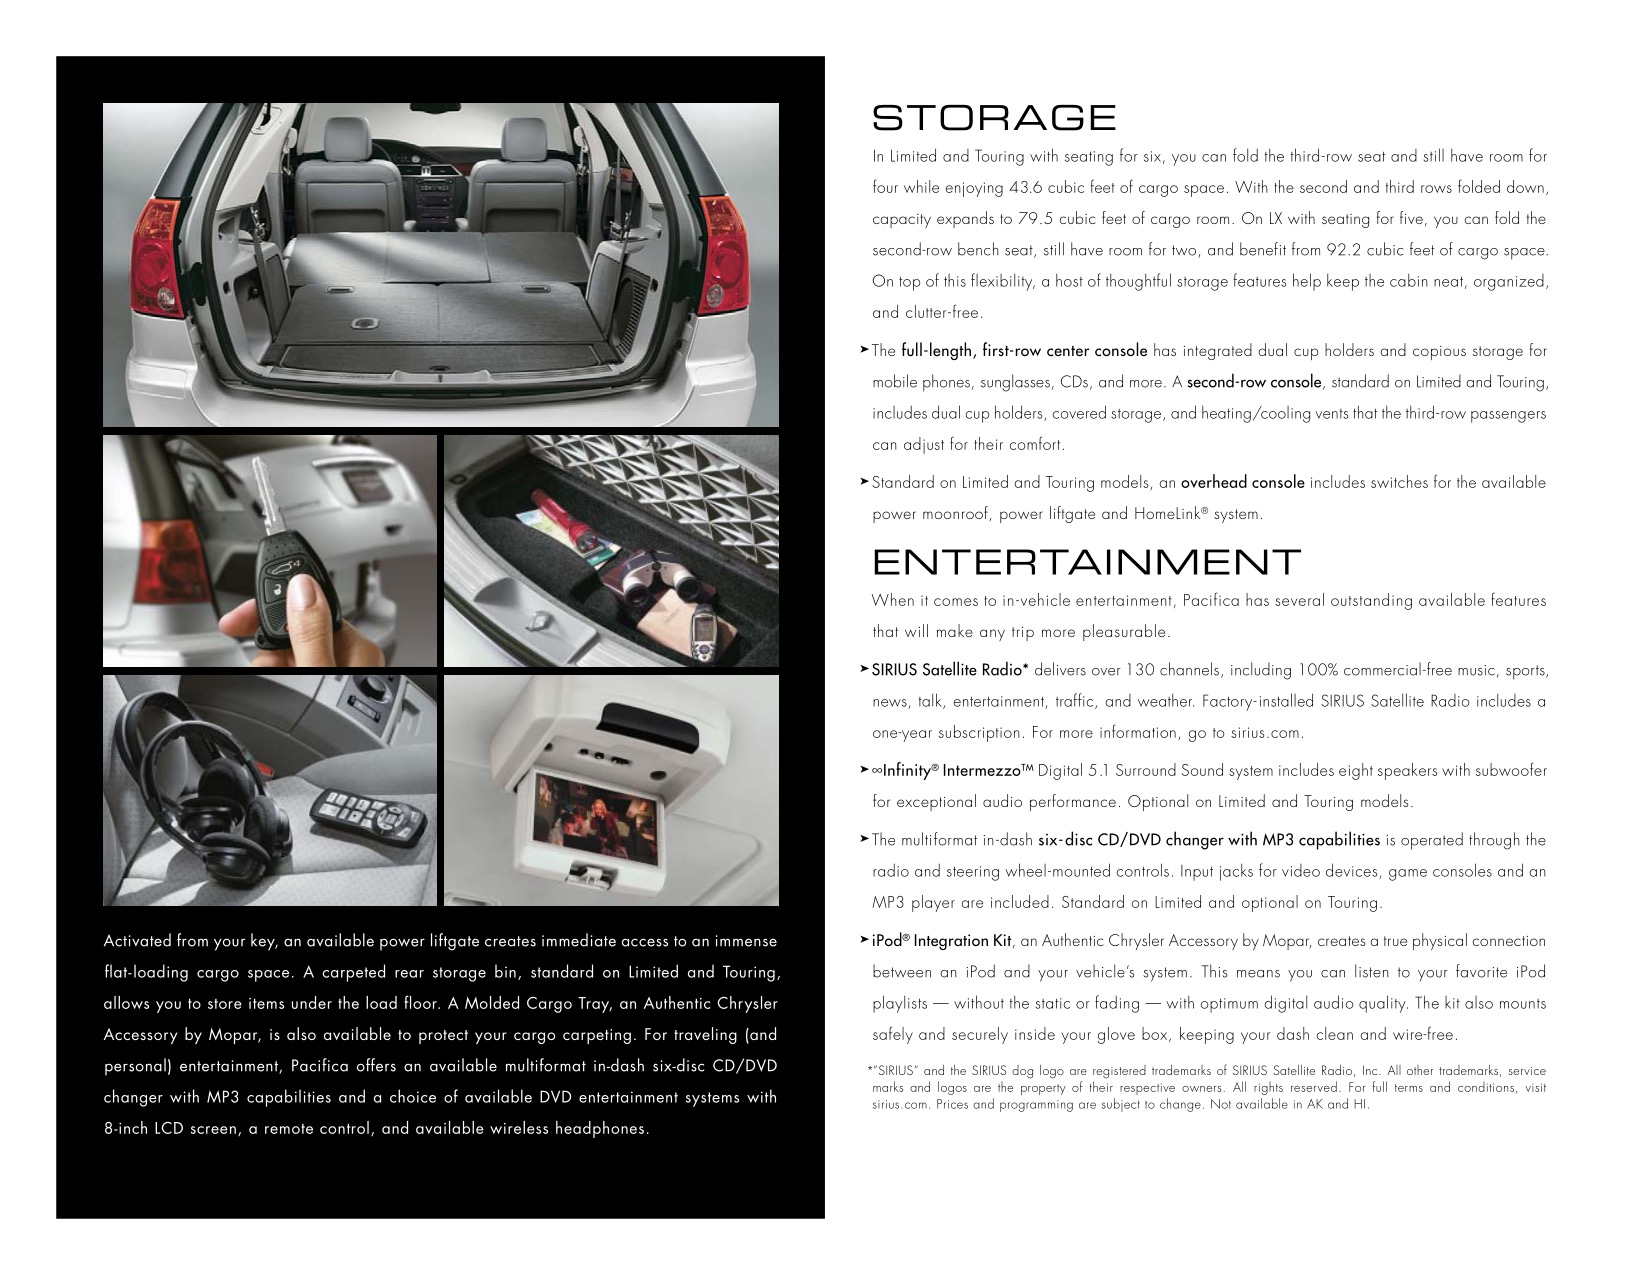 2008 Chrysler Pacifica Brochure Page 4